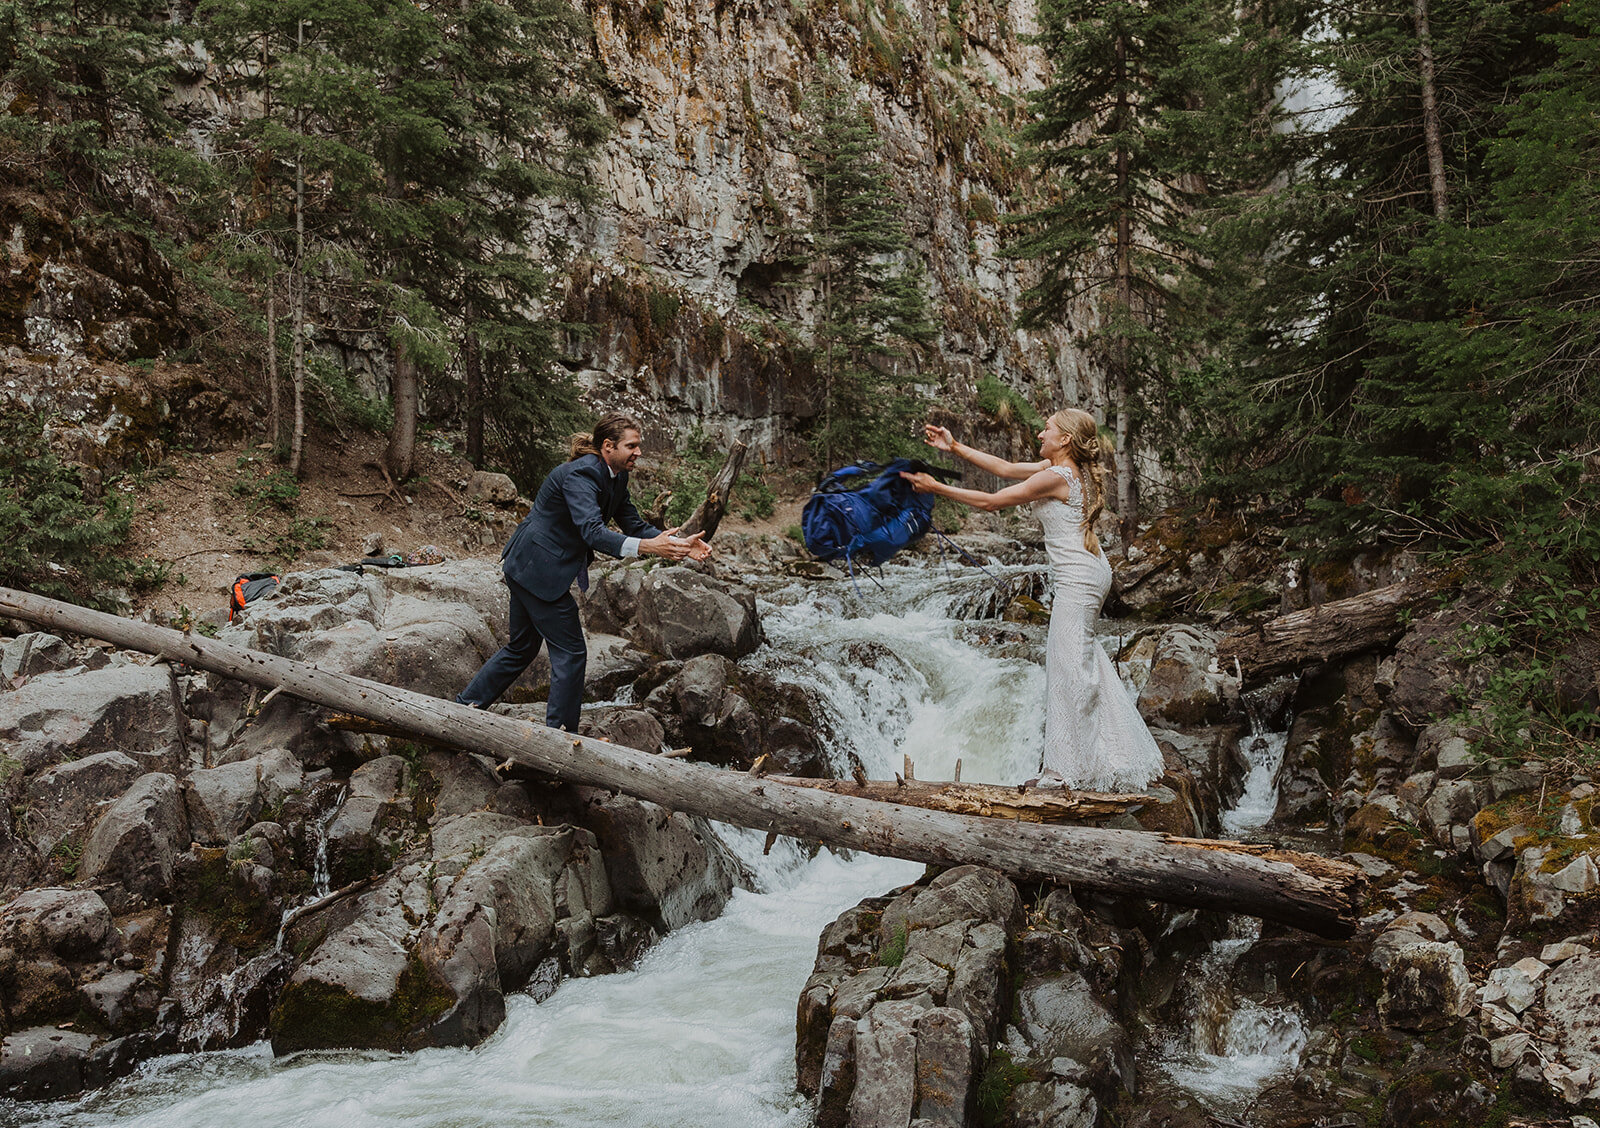 A bride and groom cross a river by delicately walking over a fallen tree . The bride in her dress throws her backpack to the fully dressed groom as the water rushes underneath their feet.